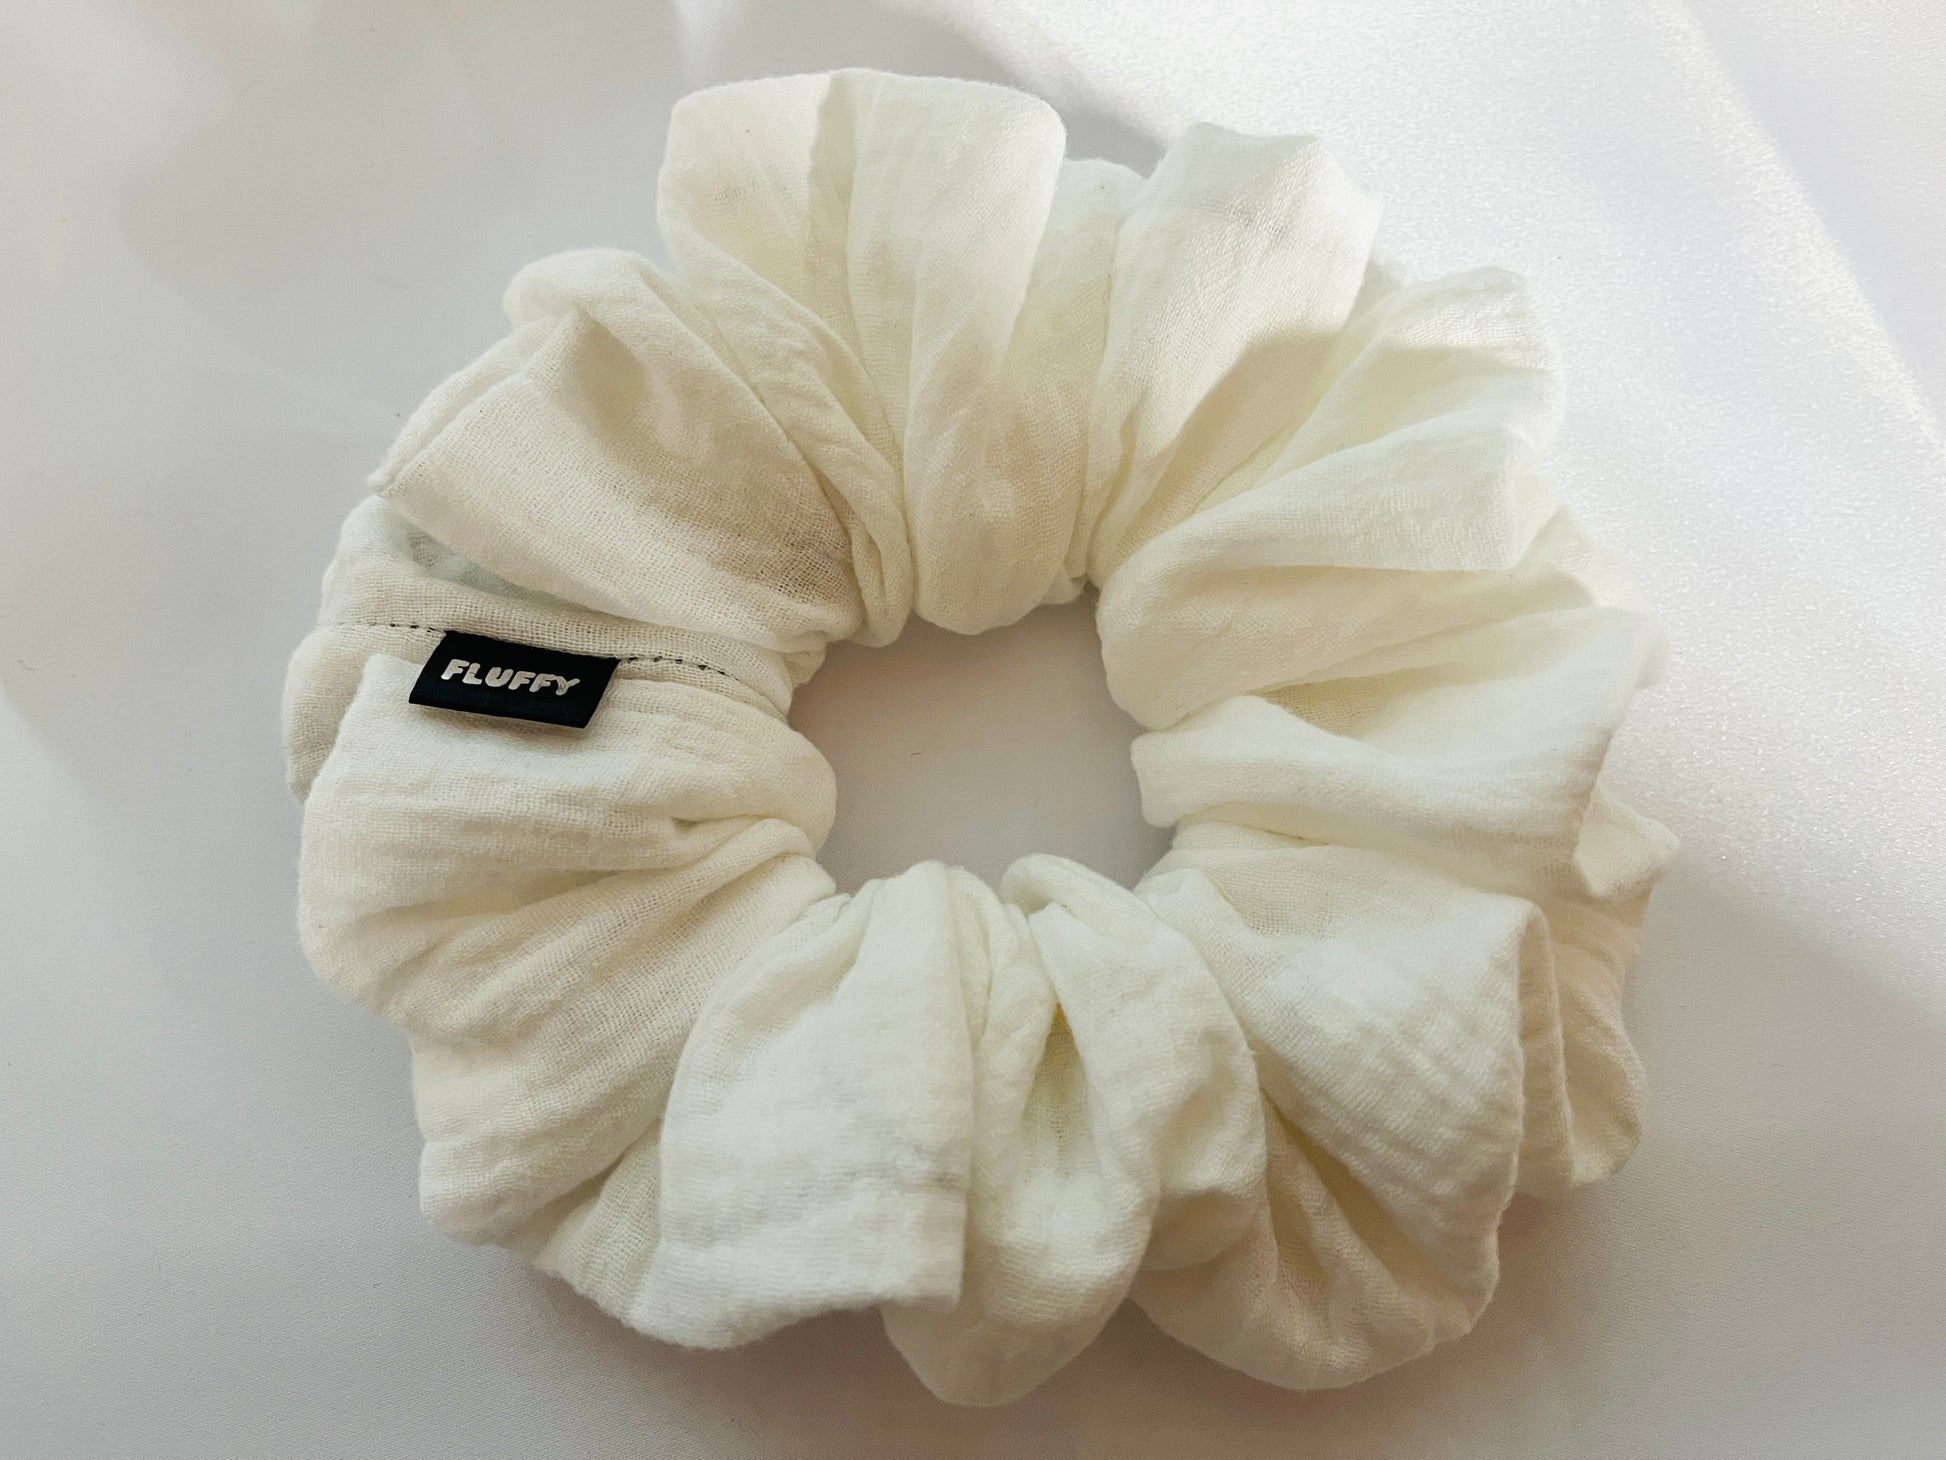 You are seeing our cotton scrunchies in 3 sizes.  The sizes of our cotton scrunchies  are Large, Medium and Mini.  Simply select the size you want in the drop down menu and add them to the card.   Our cotton scrunchies are perfect for all hair types and every person. We have multiple colors and sizes available